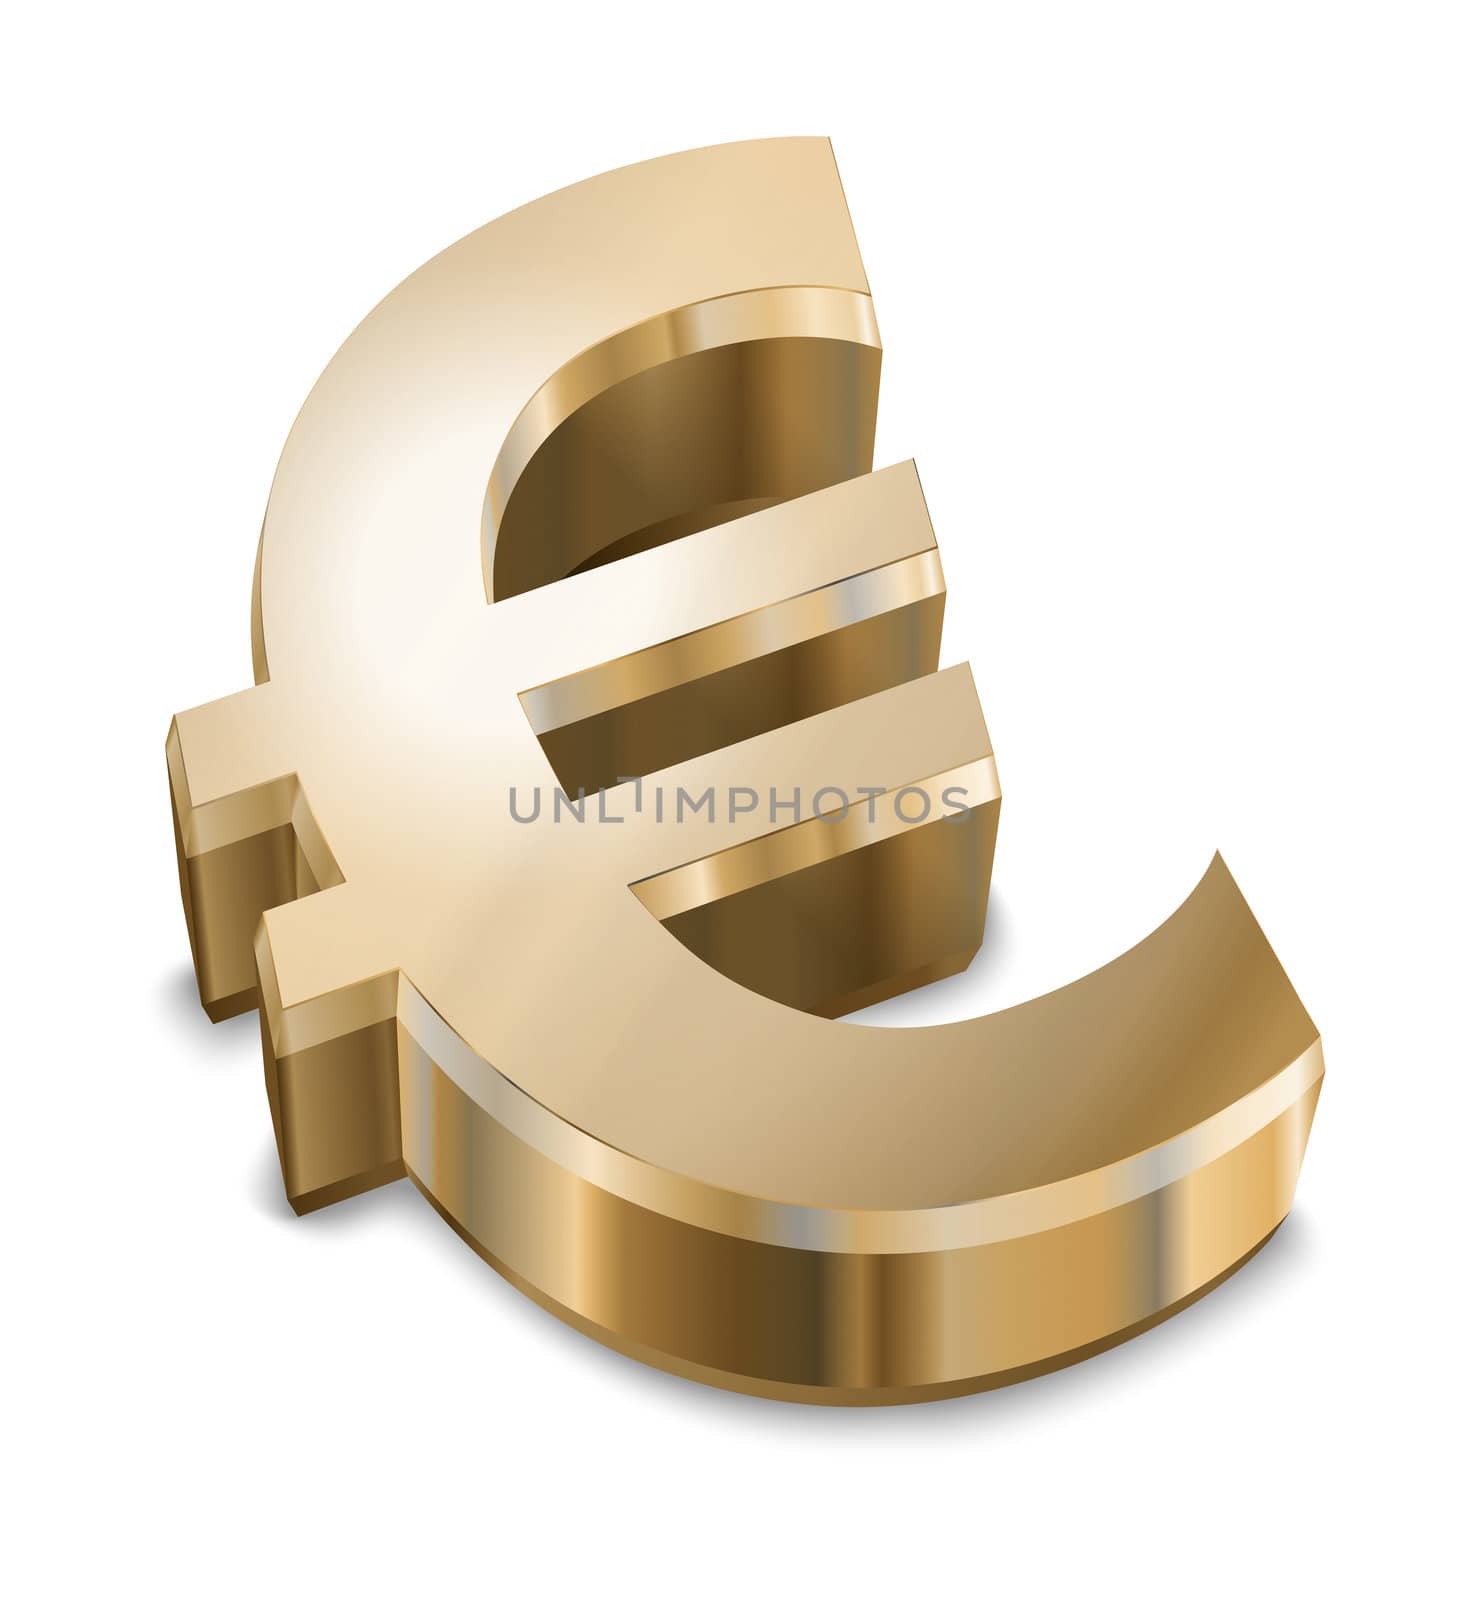 An image of a golden Euro sign